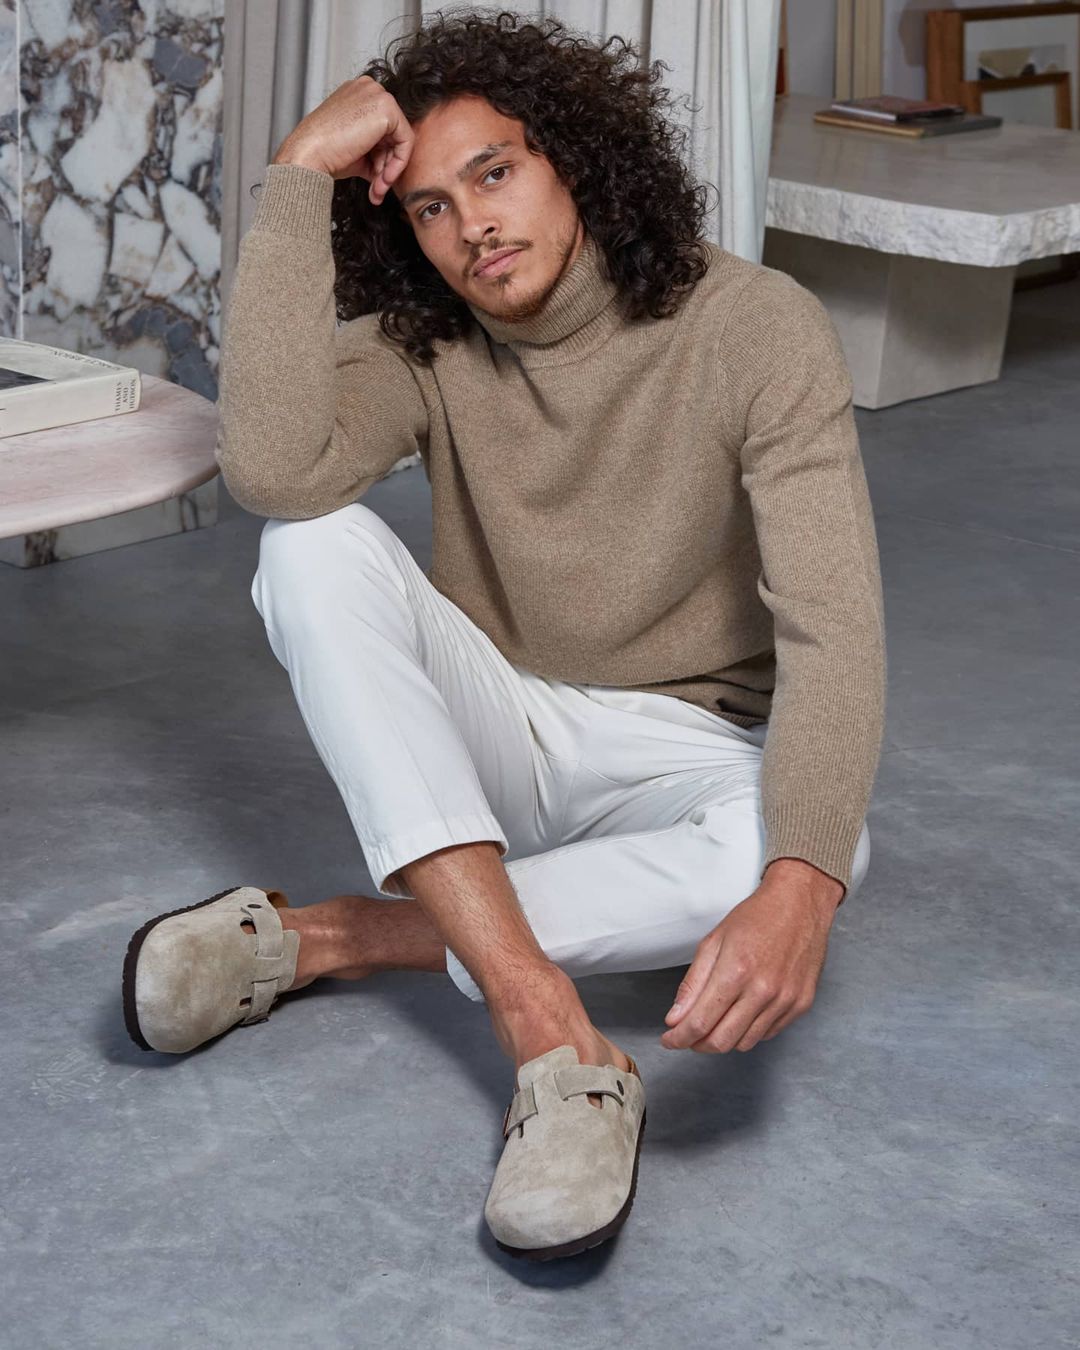 Male model is sitting on the floor